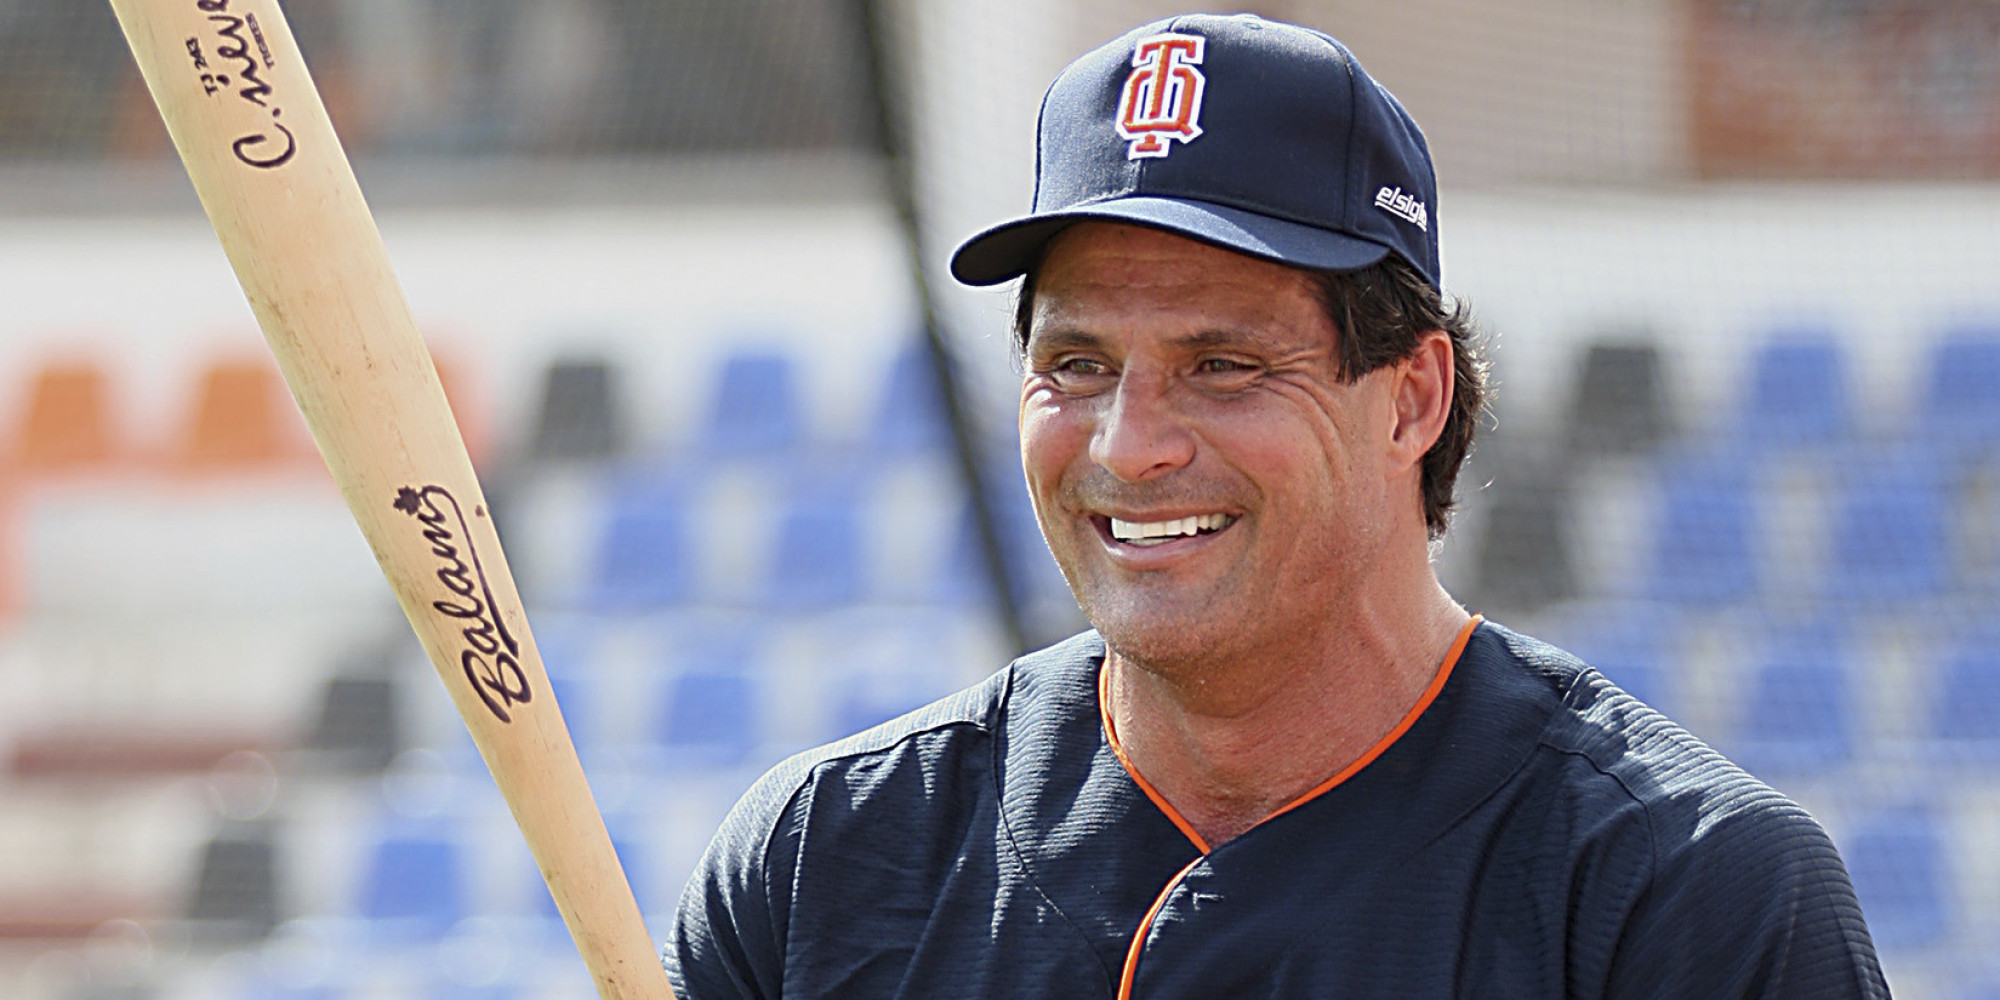 Jose Canseco Pulled Over With Goats In Car, Because Of Course (VIDEO